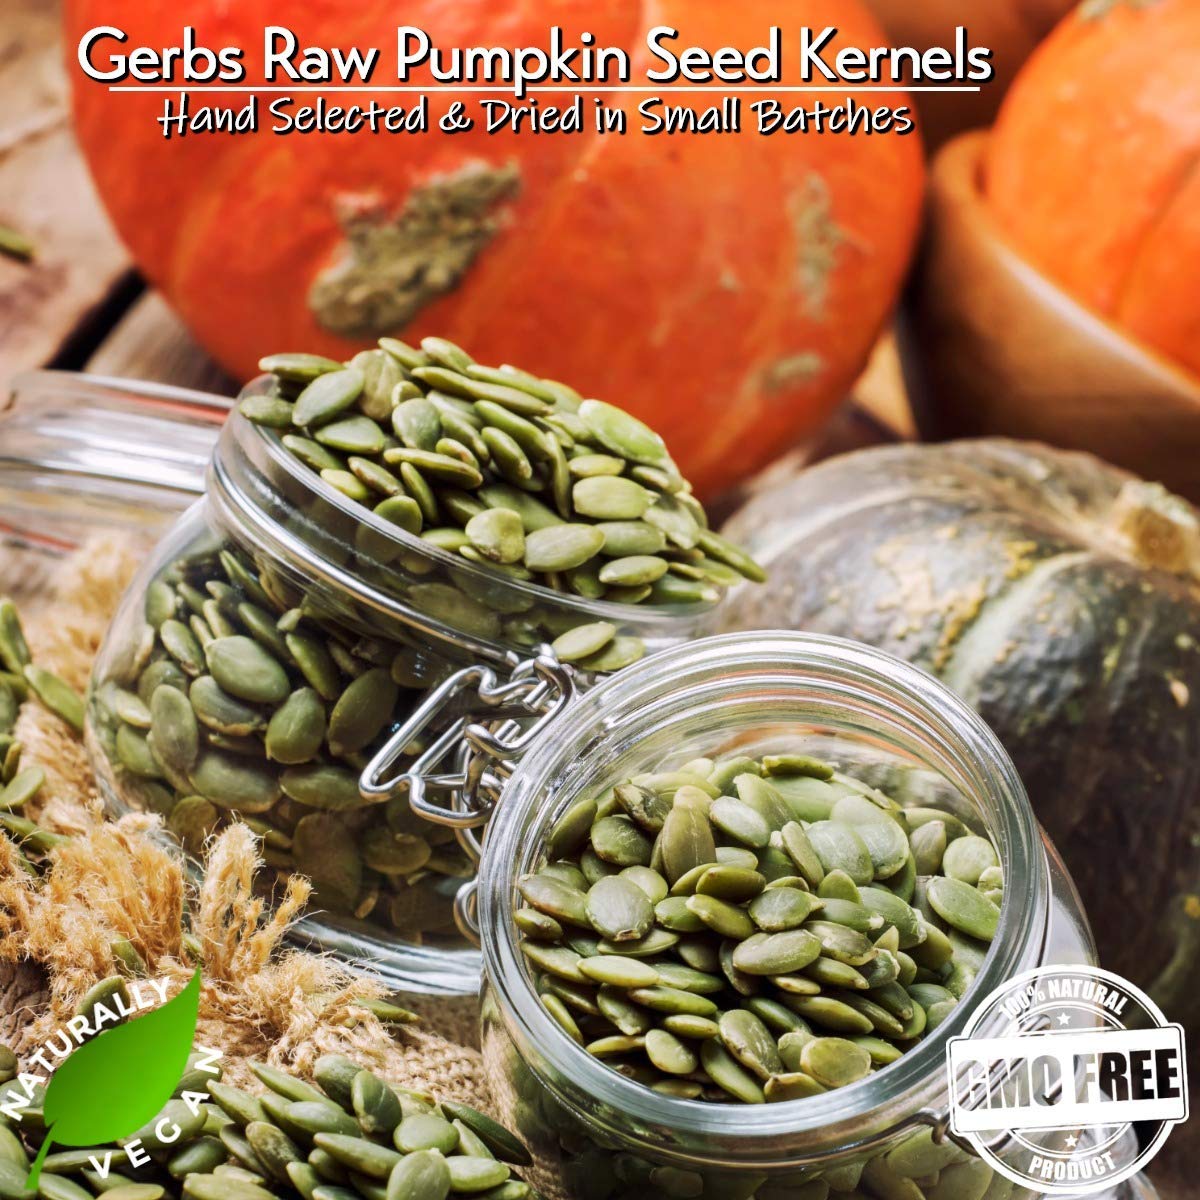 GERBS Raw Pumpkin Seed Kernels 1 LB | Top 14 Allergy Free Food | Protein rich super snack food | Use in salads, yogurt, baking, oatmeal, trail mix | Grown in Canada, packaged in USA | Vegan, Kosher : Grocery & Gourmet Food